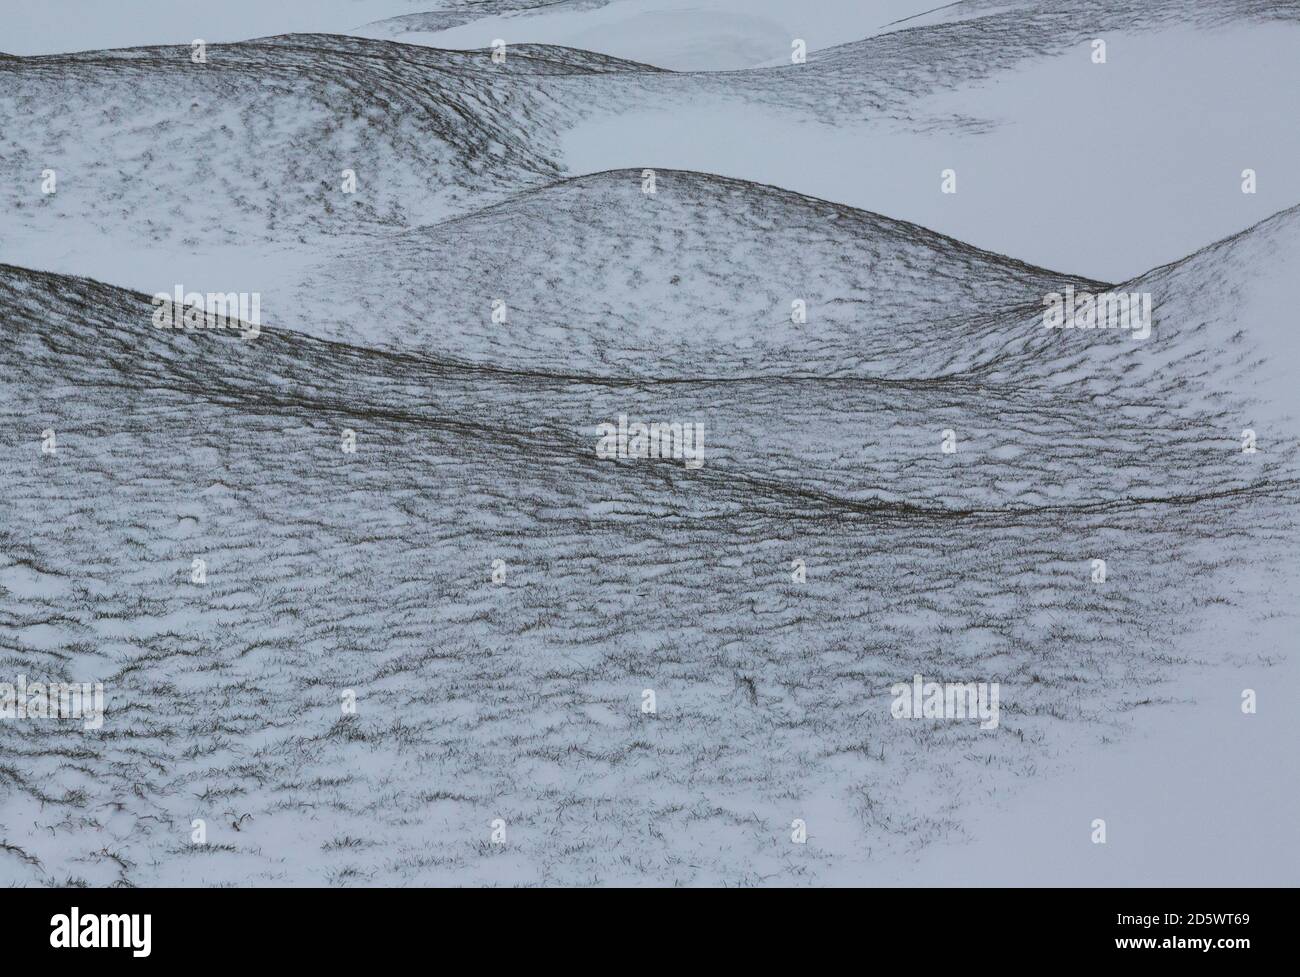 Contours of landscape after snowfall Stock Photo